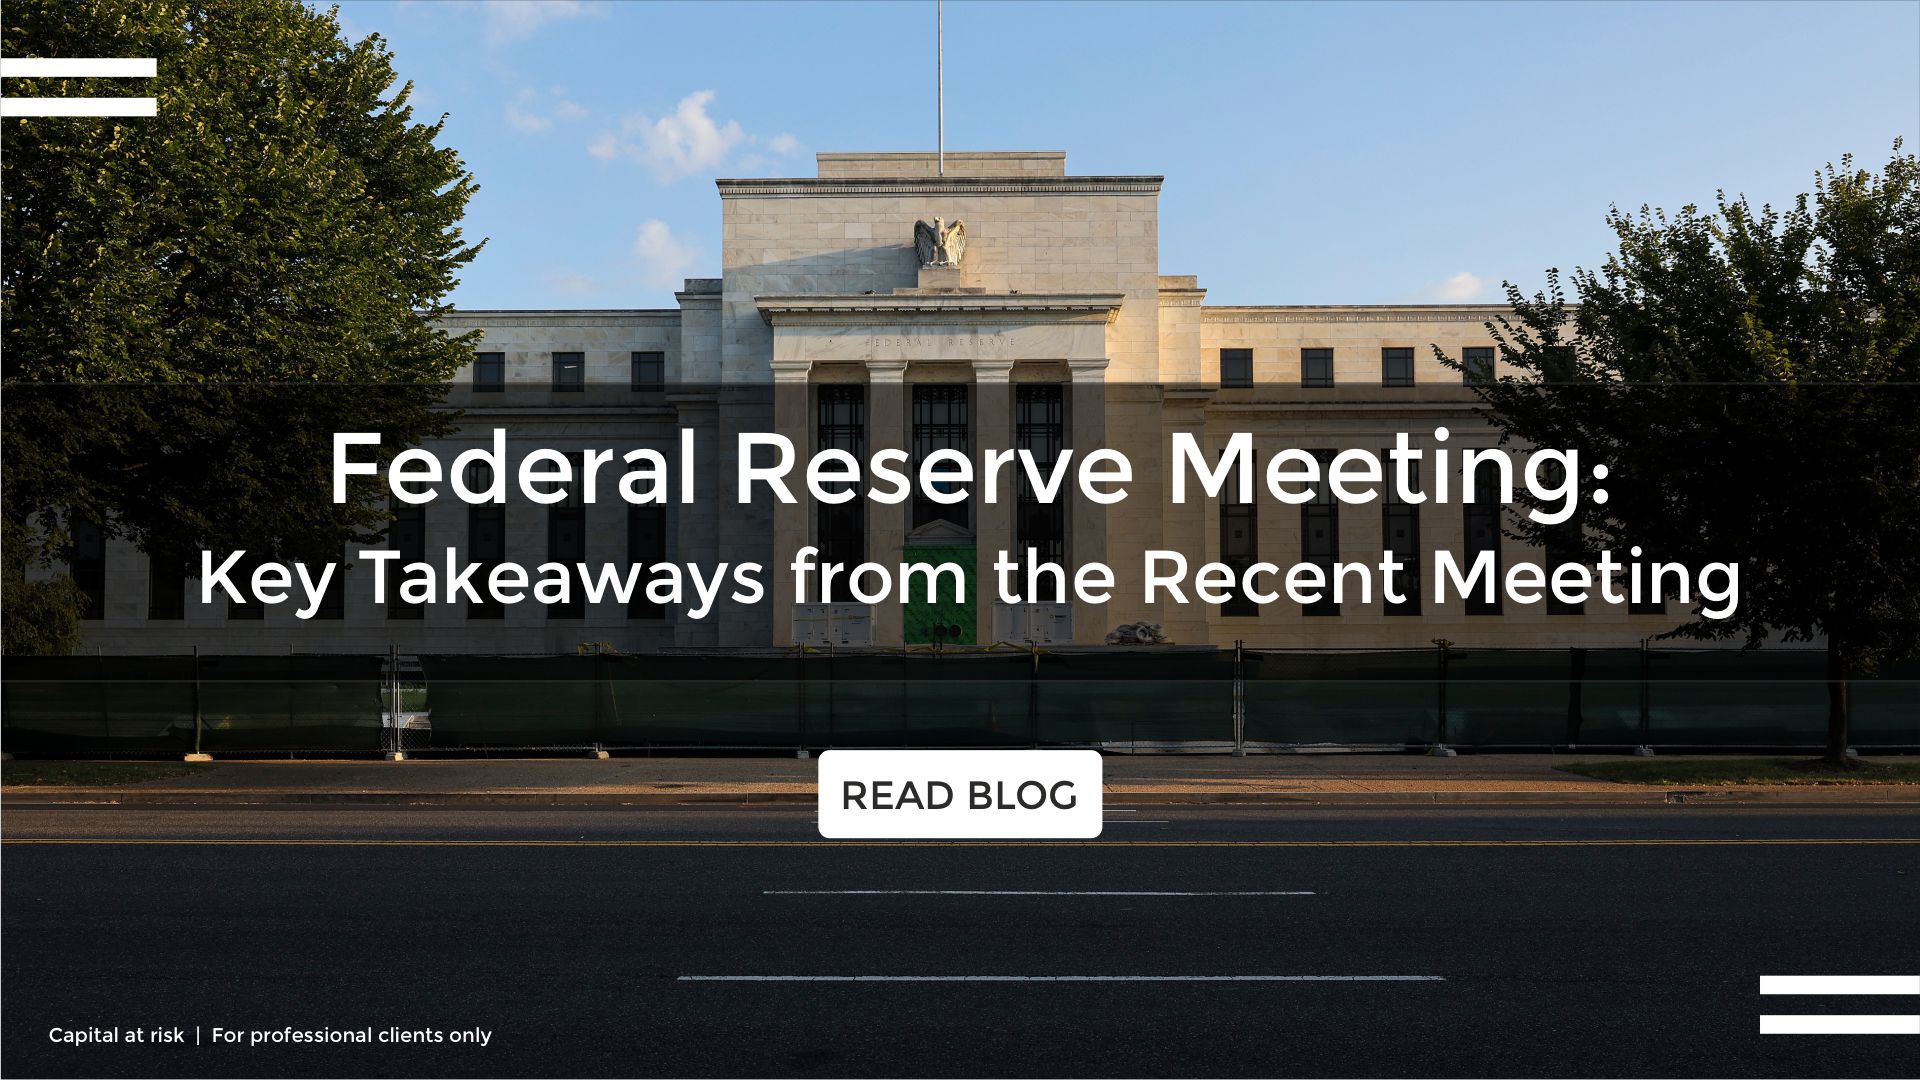 Federal Reserve Meeting Highlights